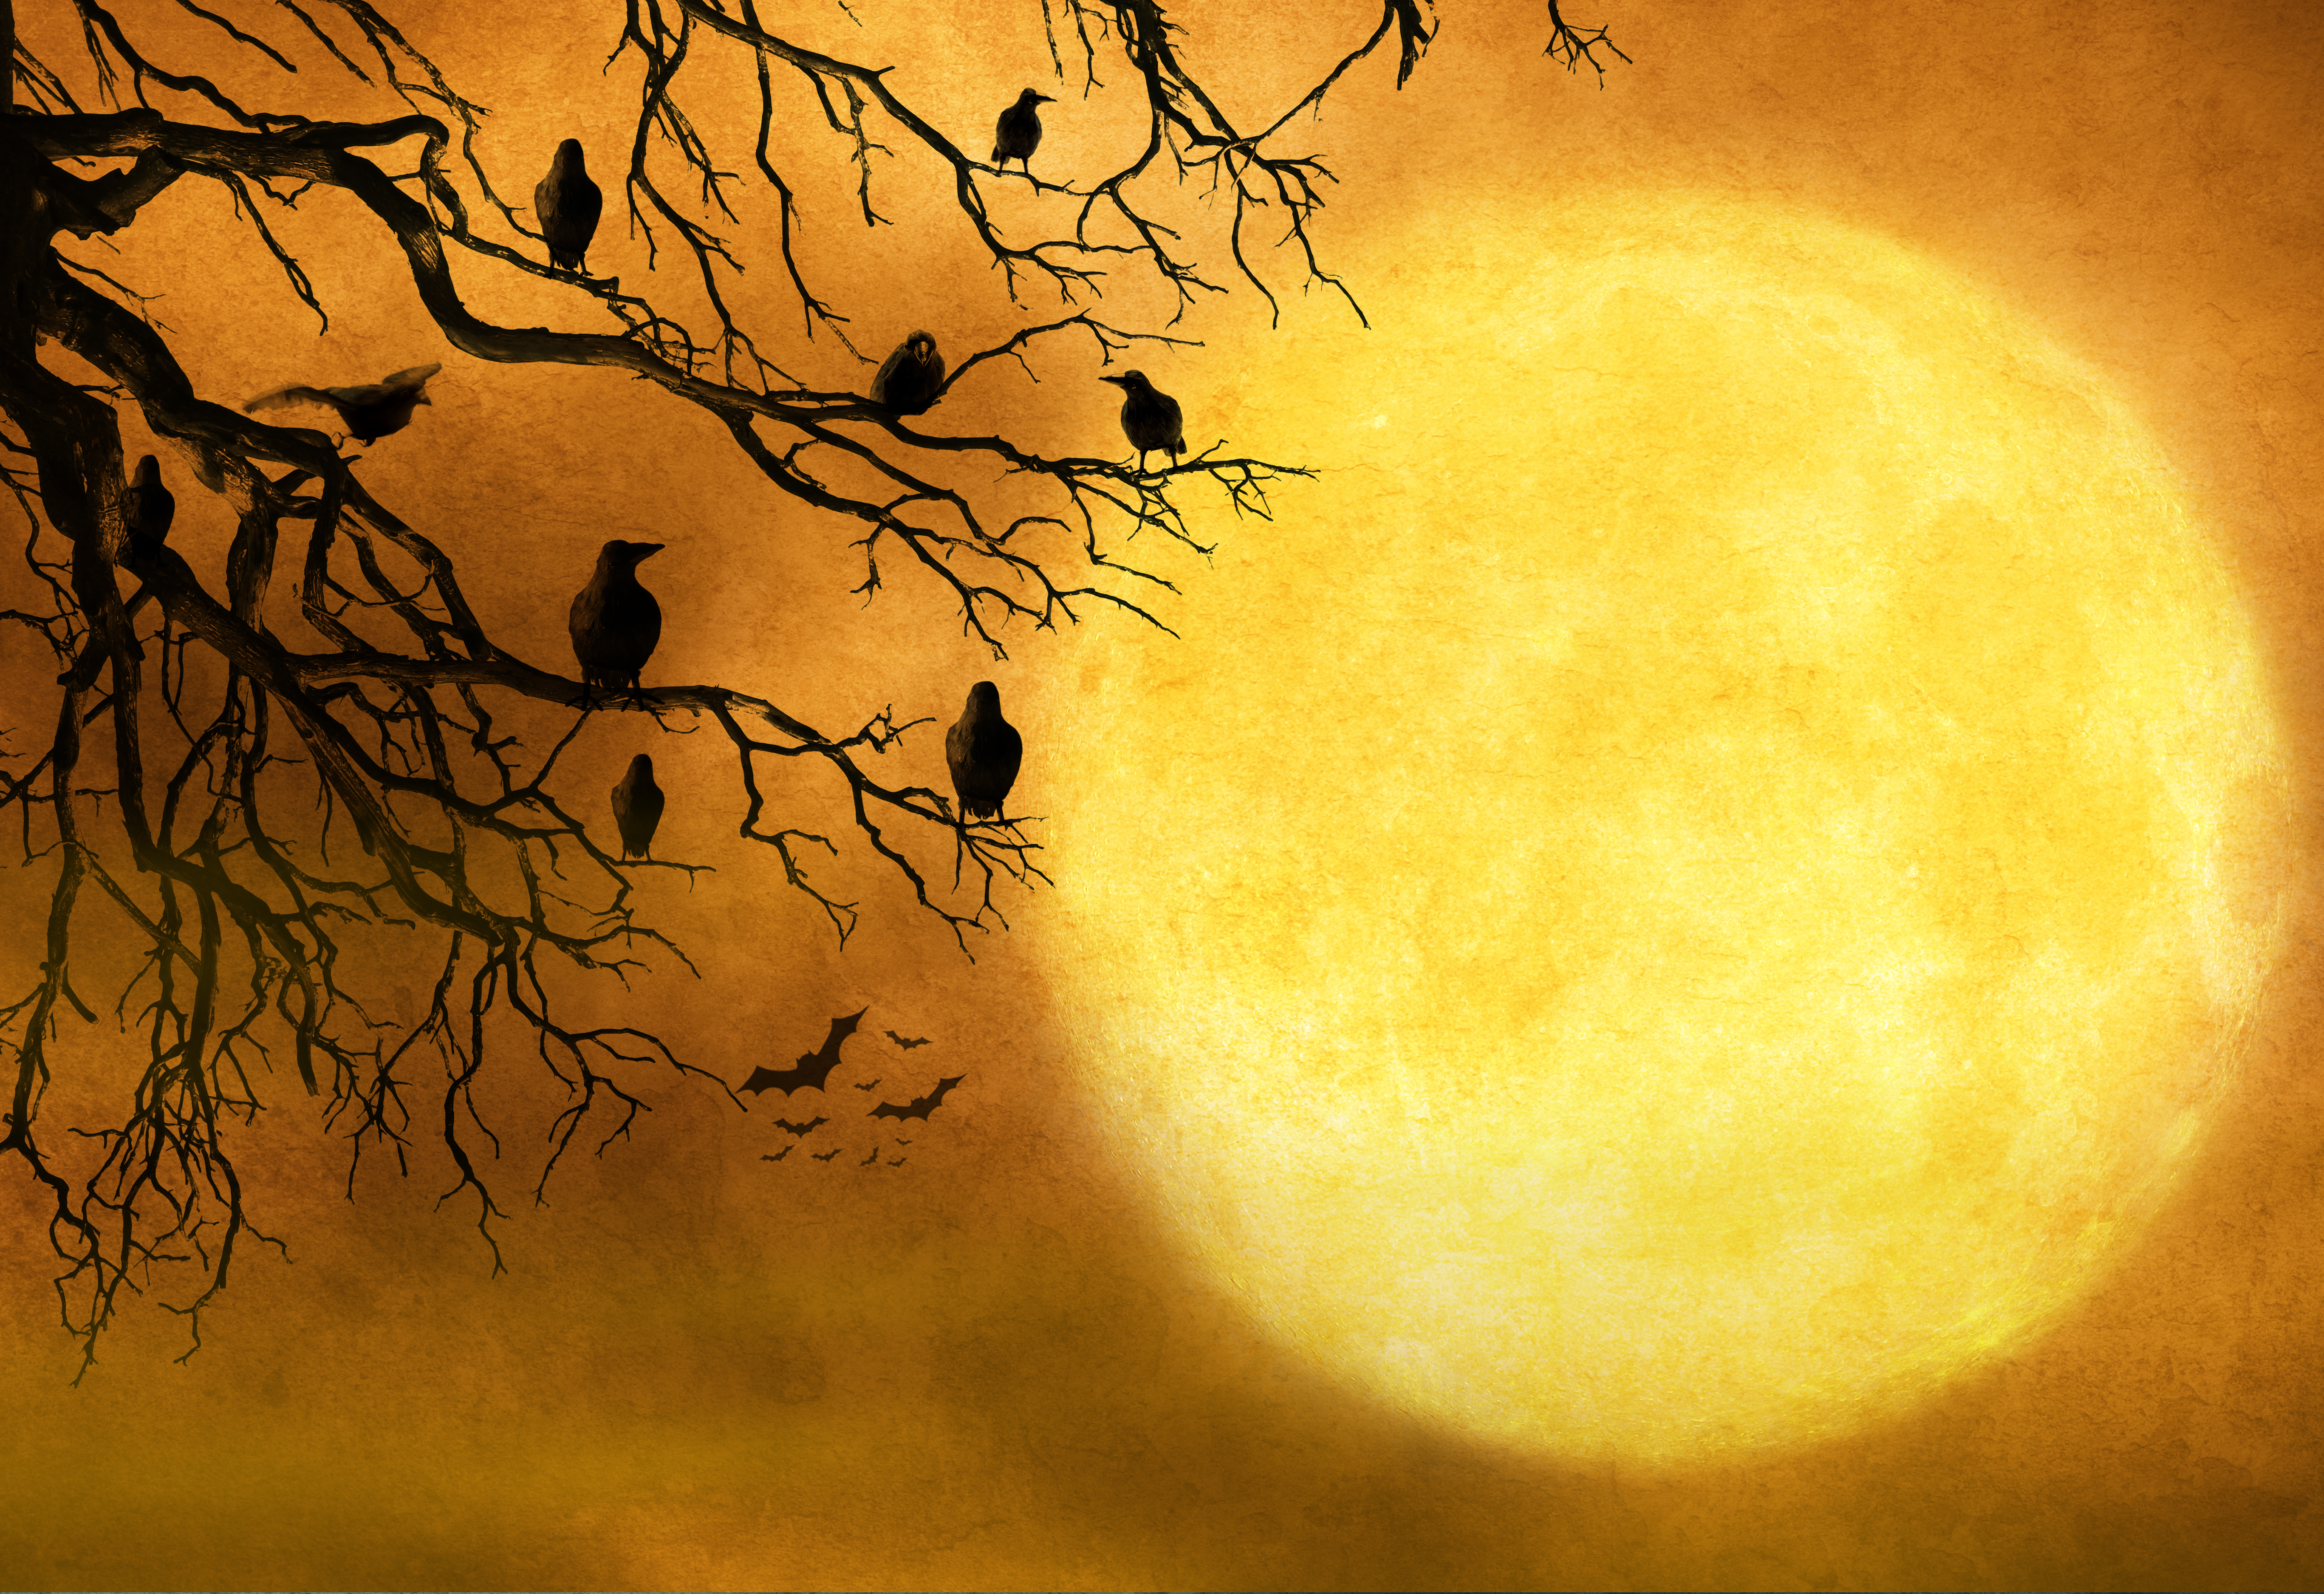 Black ravens sit in a barren tree against a full moon on Halloween night. The night time sky provides ample room for copy and text.